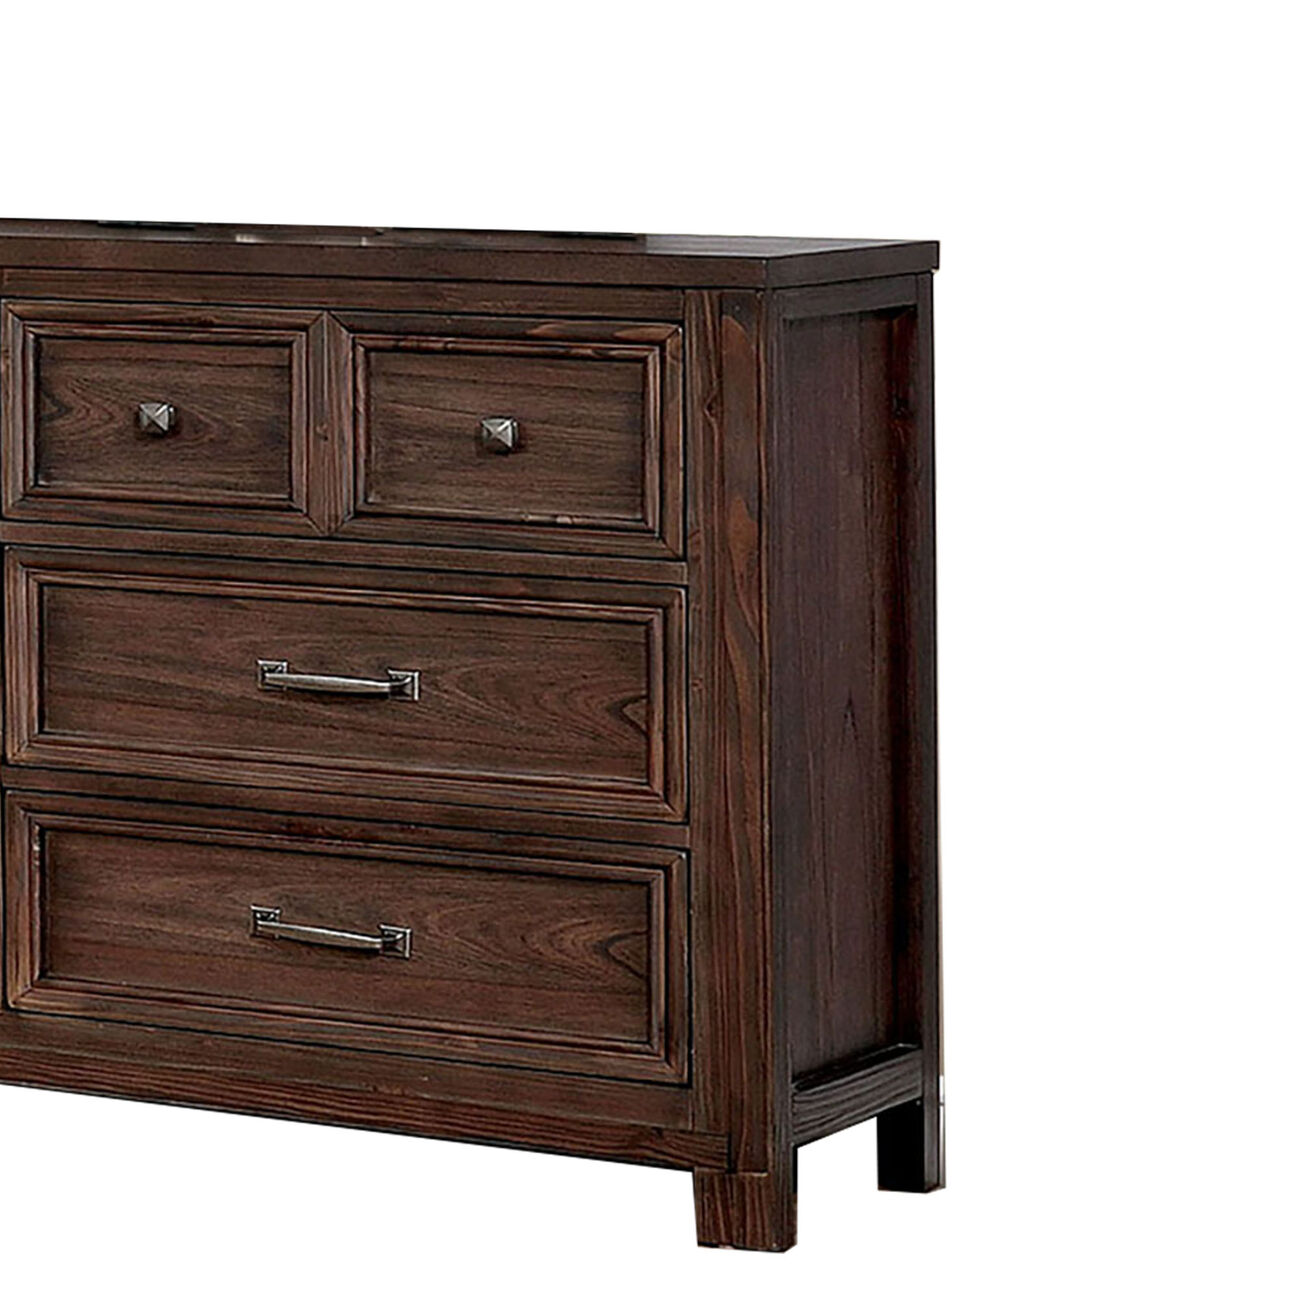 6 Drawer Transitional Wooden Dresser with Molded Trim, Brown